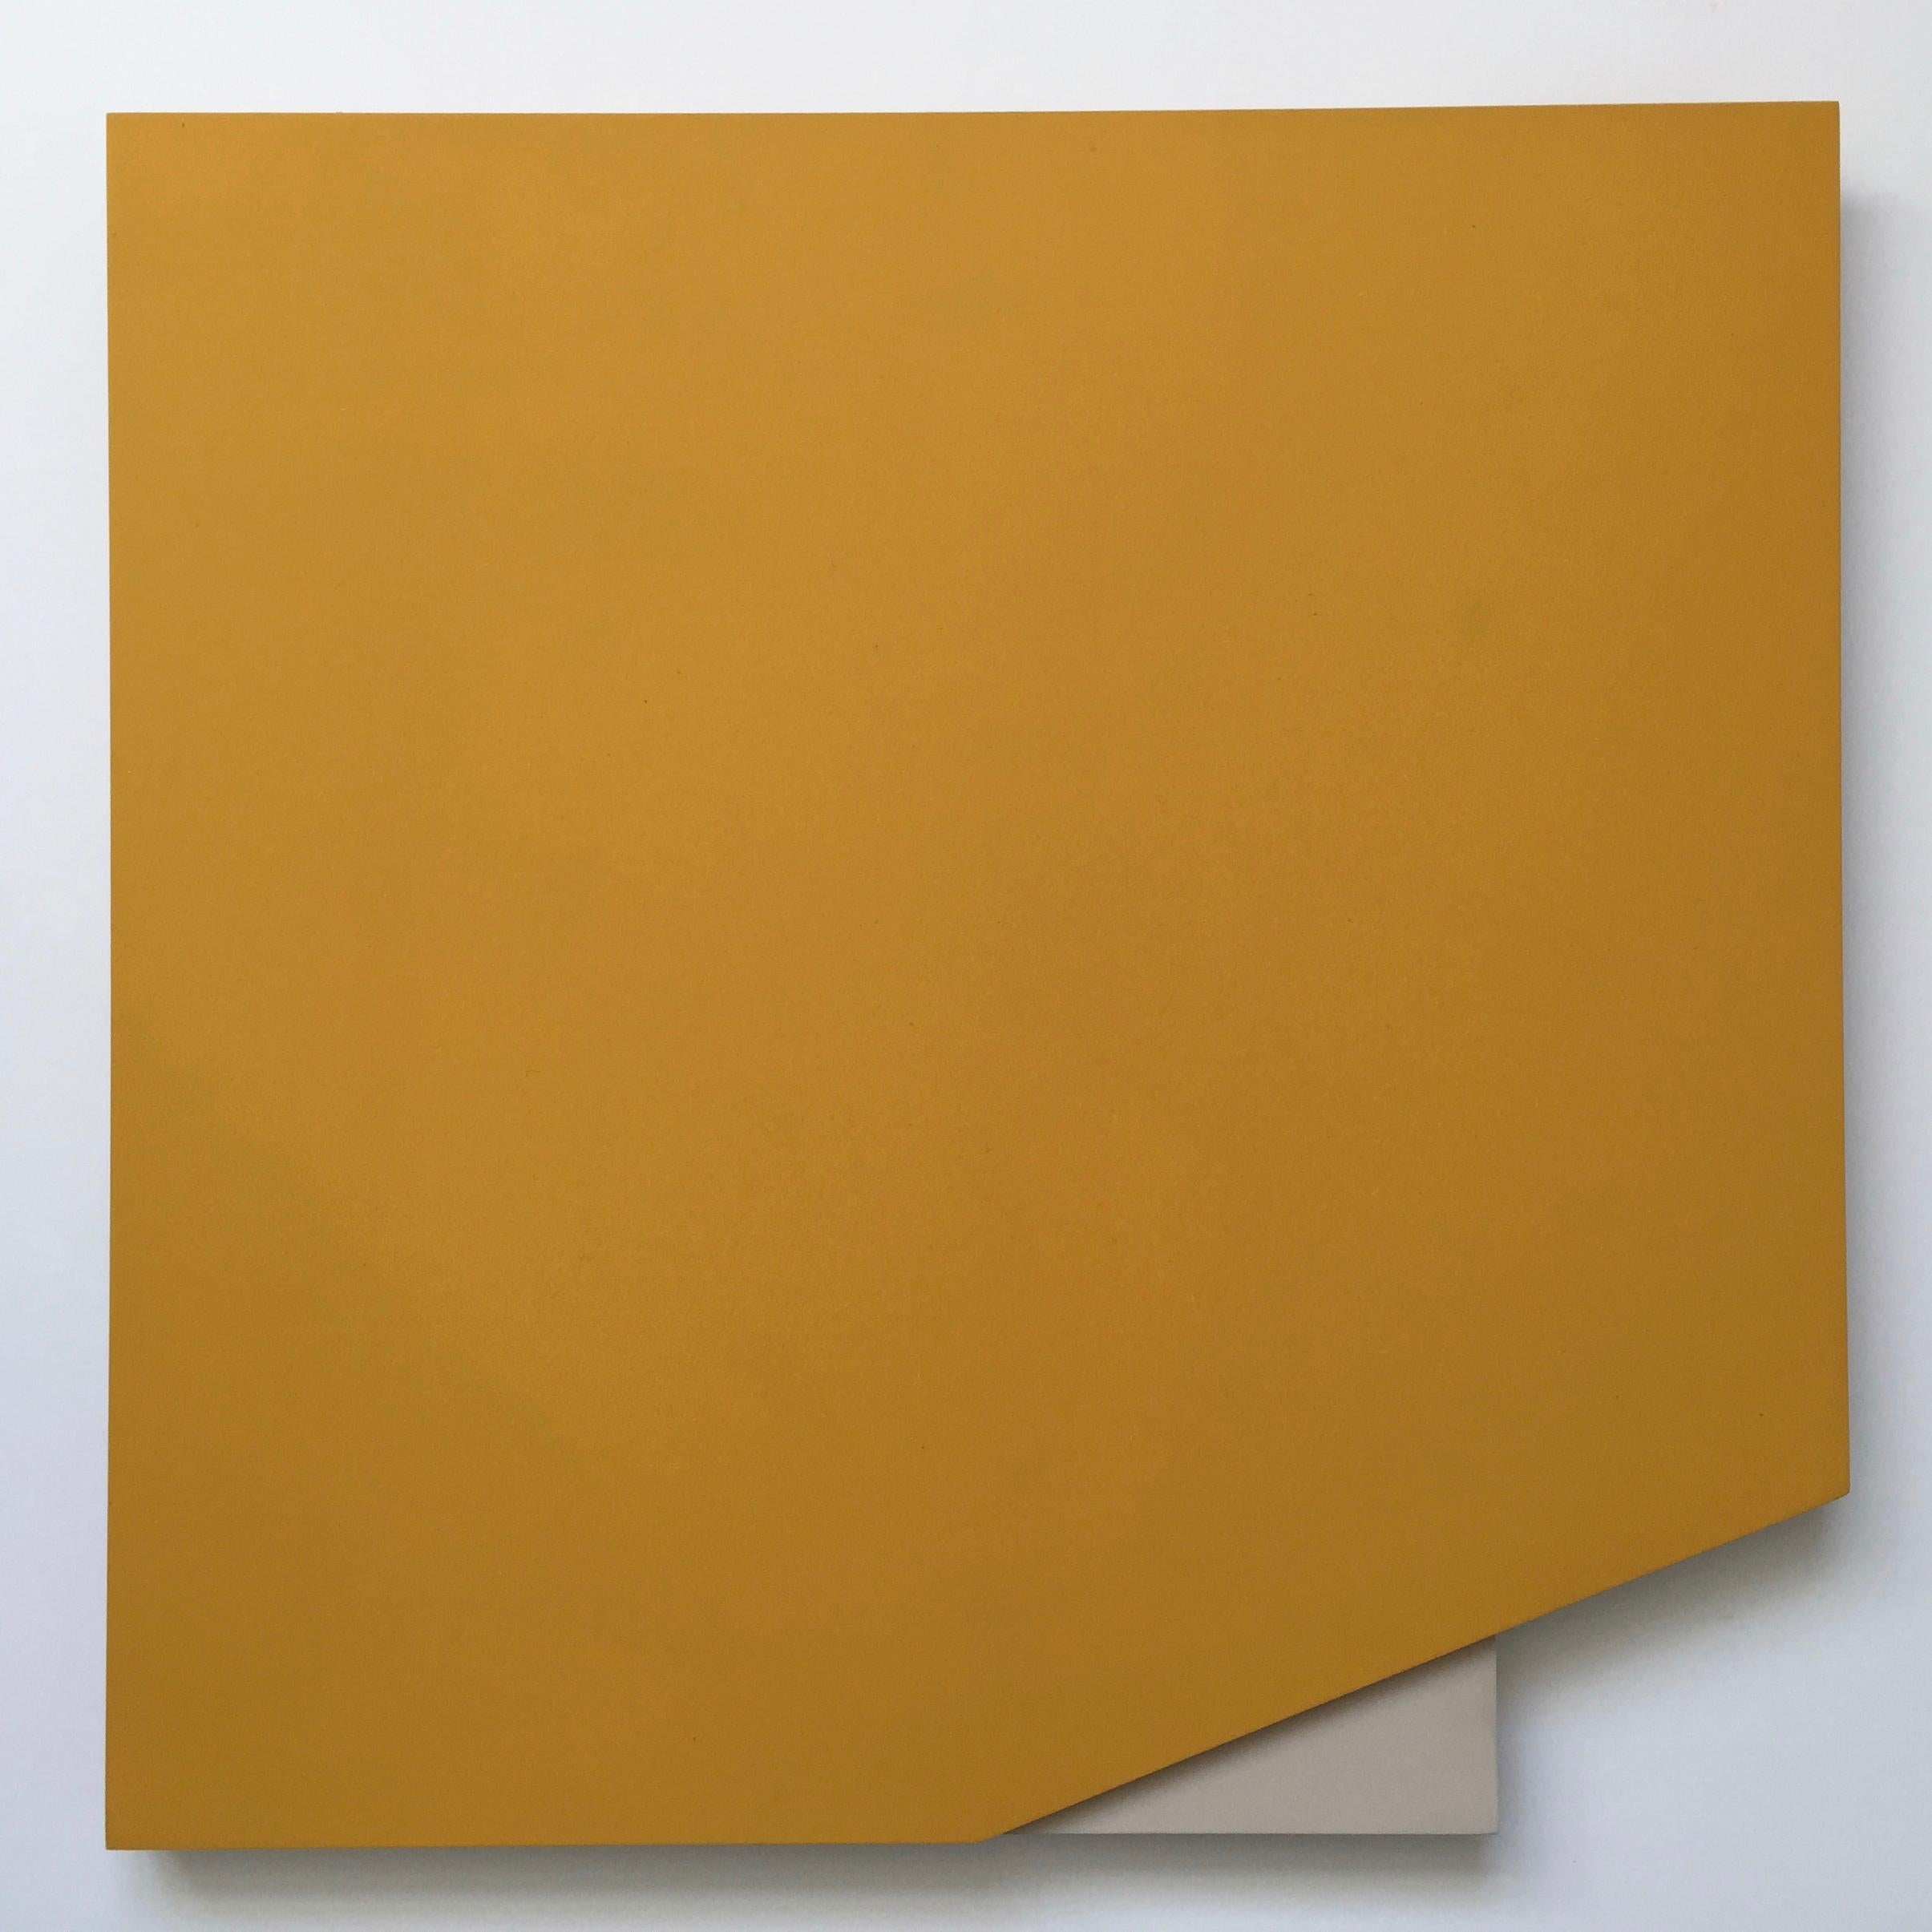 Laura Jane Scott Abstract Sculpture - Cut Out 50 series (number 003): Minimal Hard Edge Abstract Painting Construction